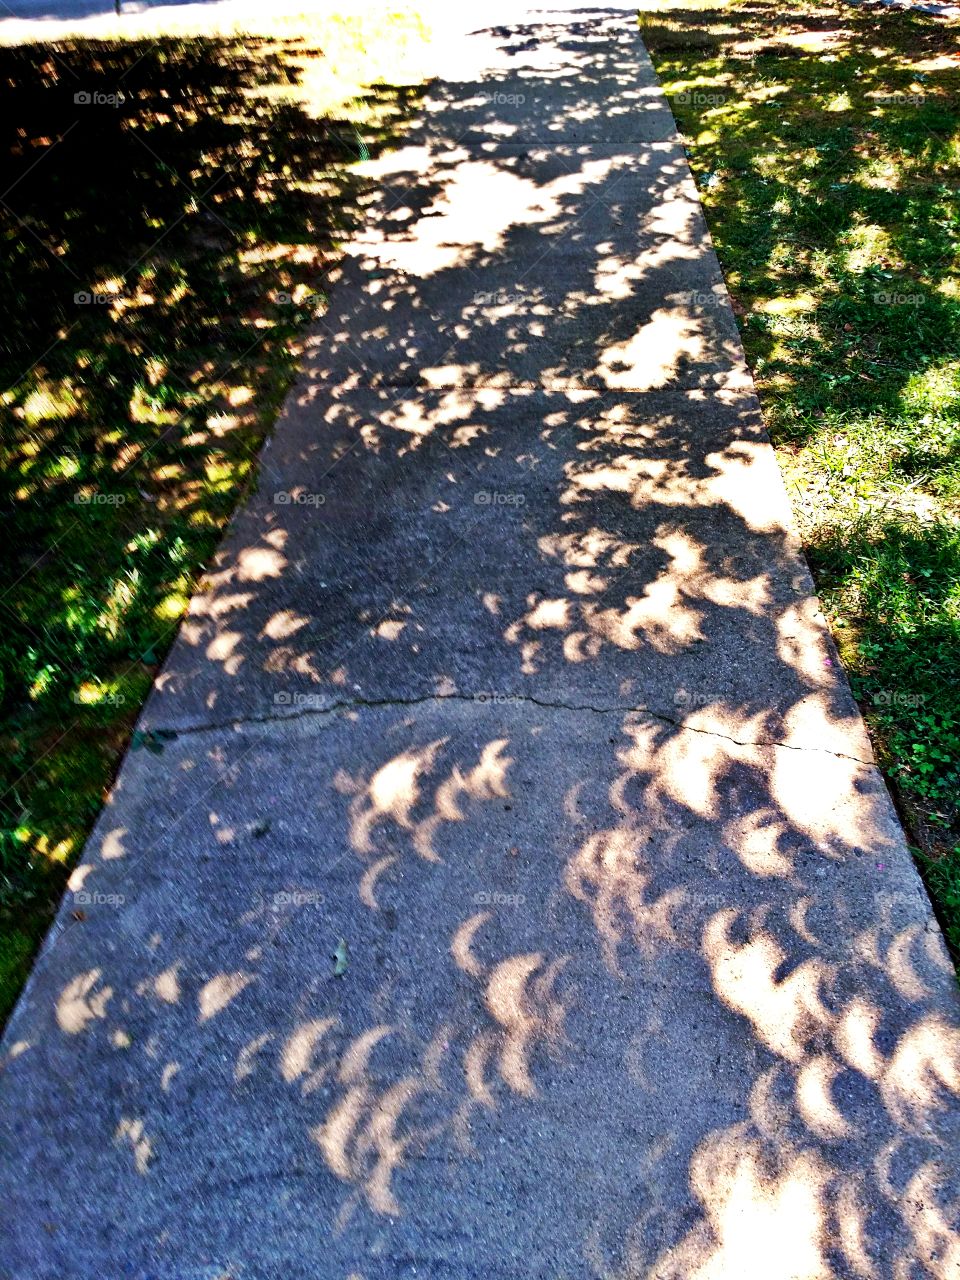 Eclipse in shadow